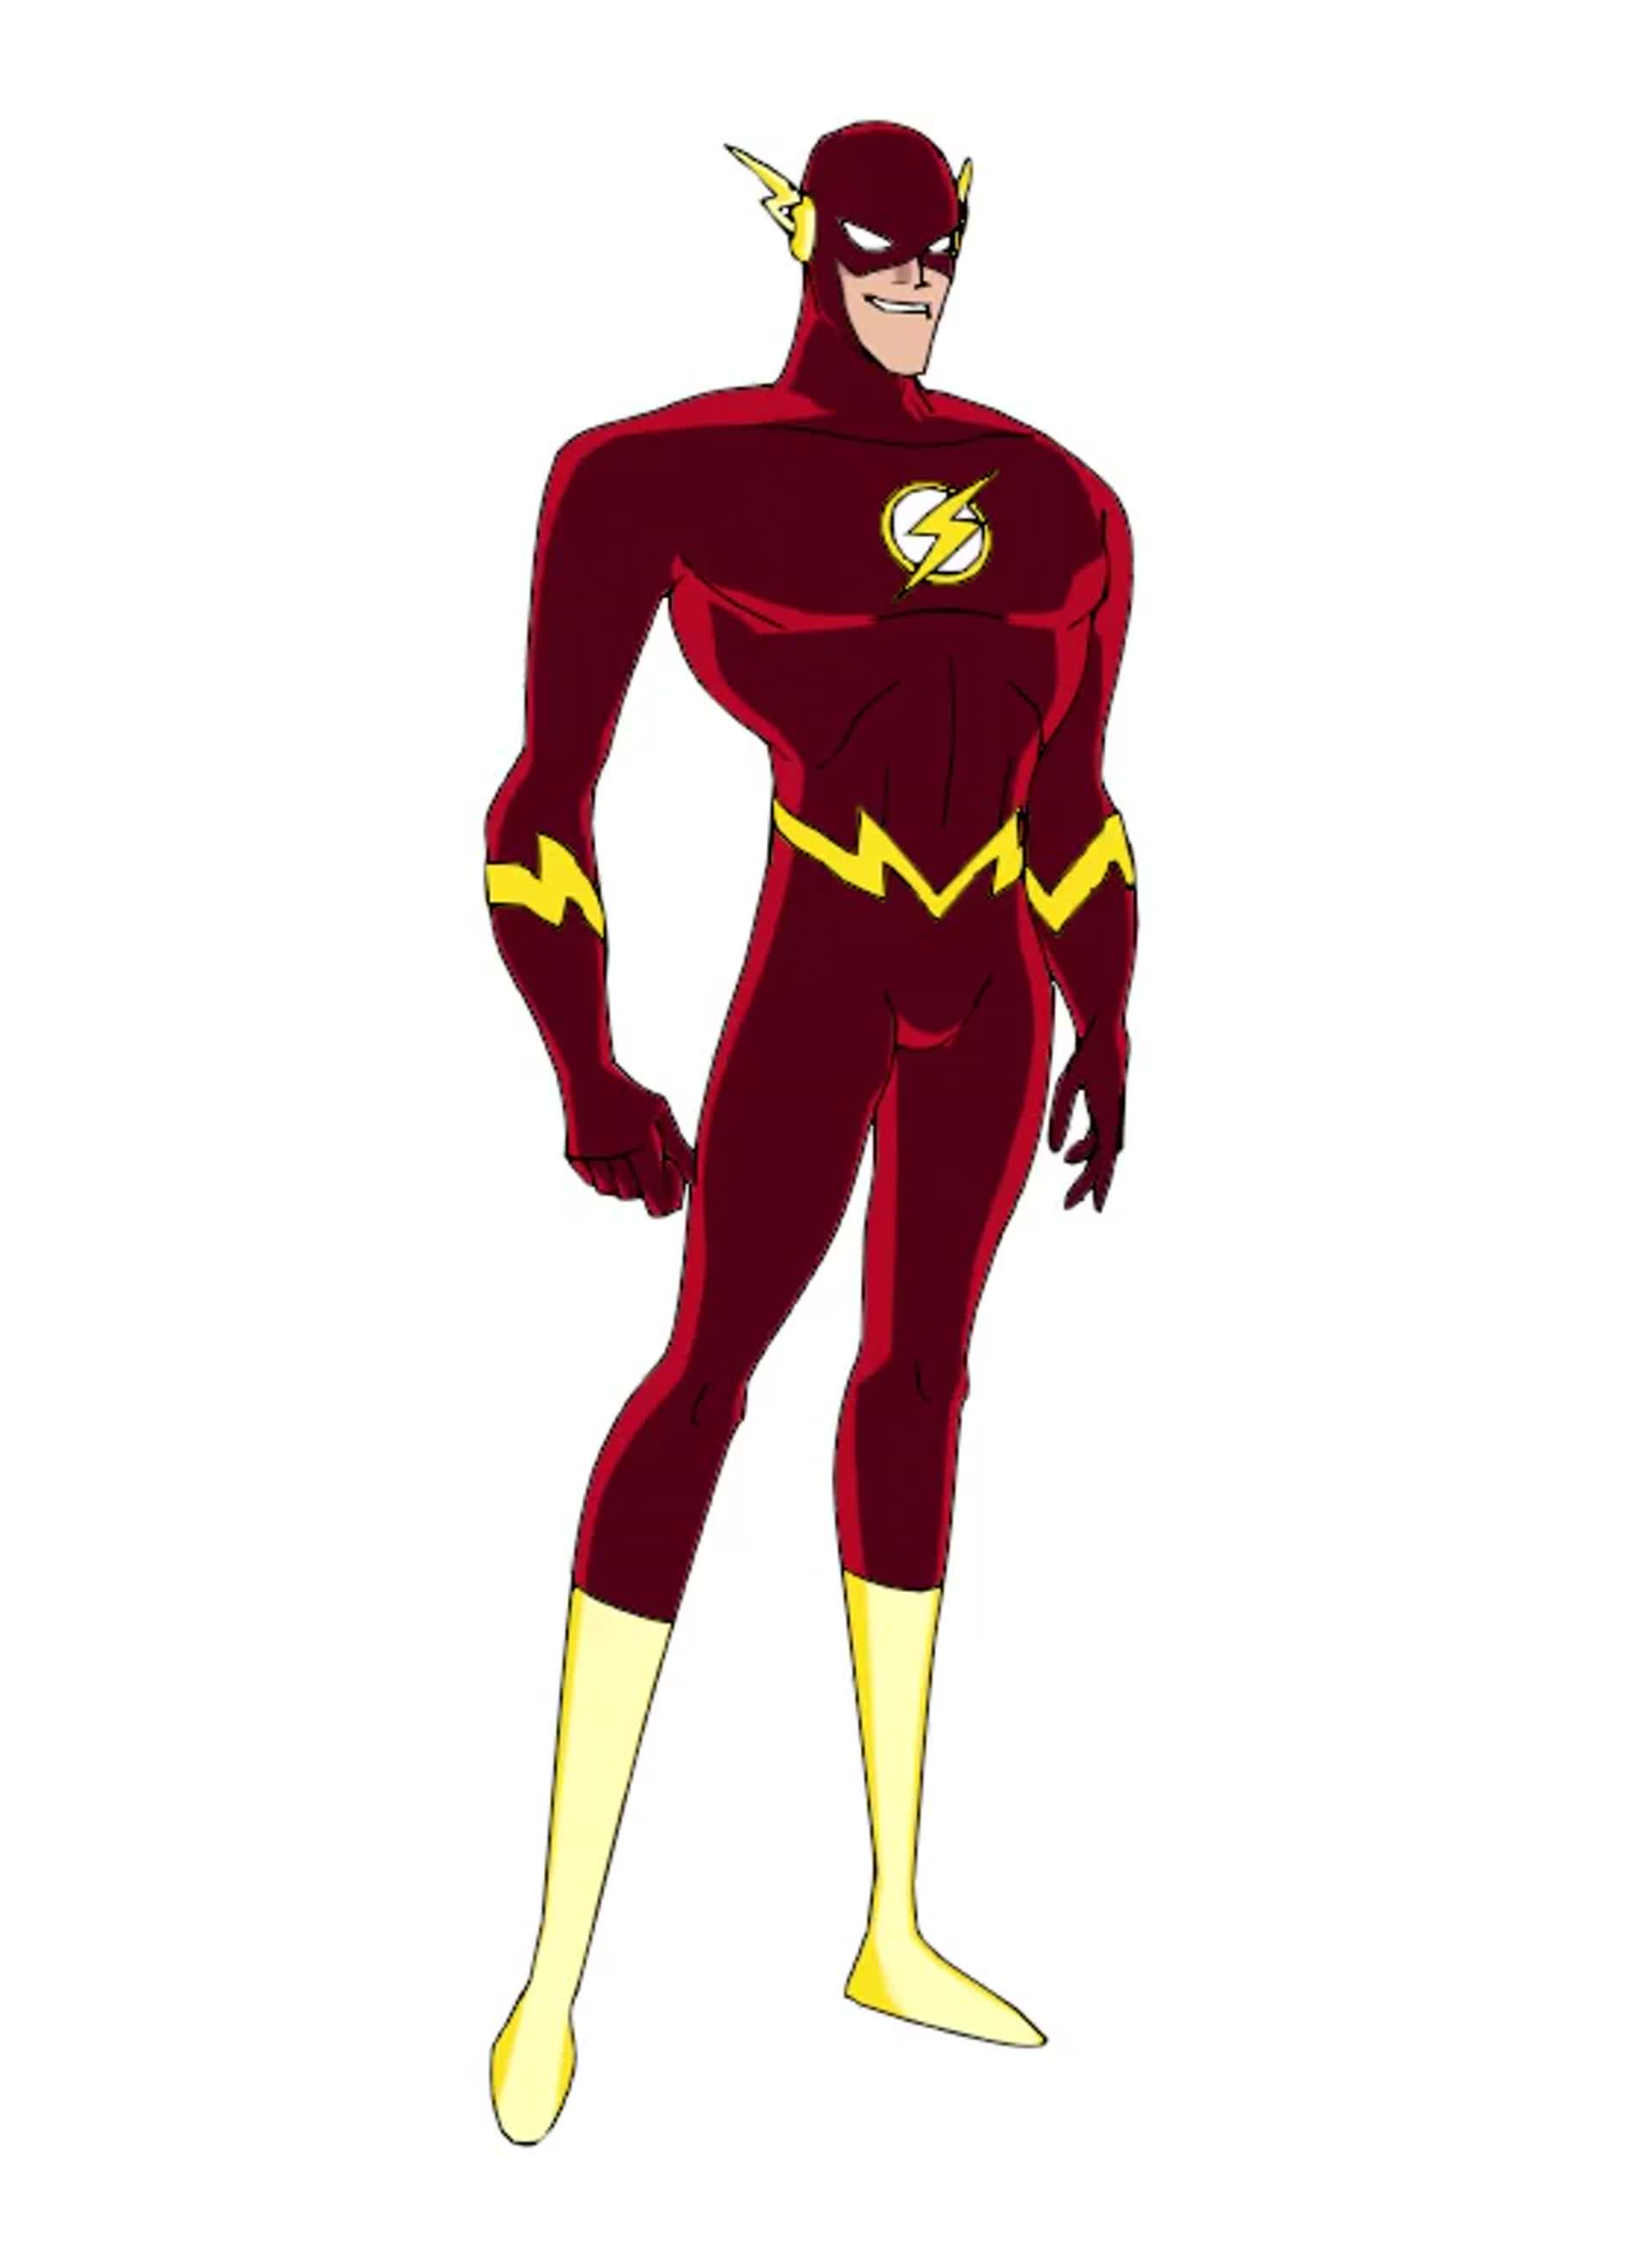 ArtStation - 3D Justice League Animated Series: The Flash